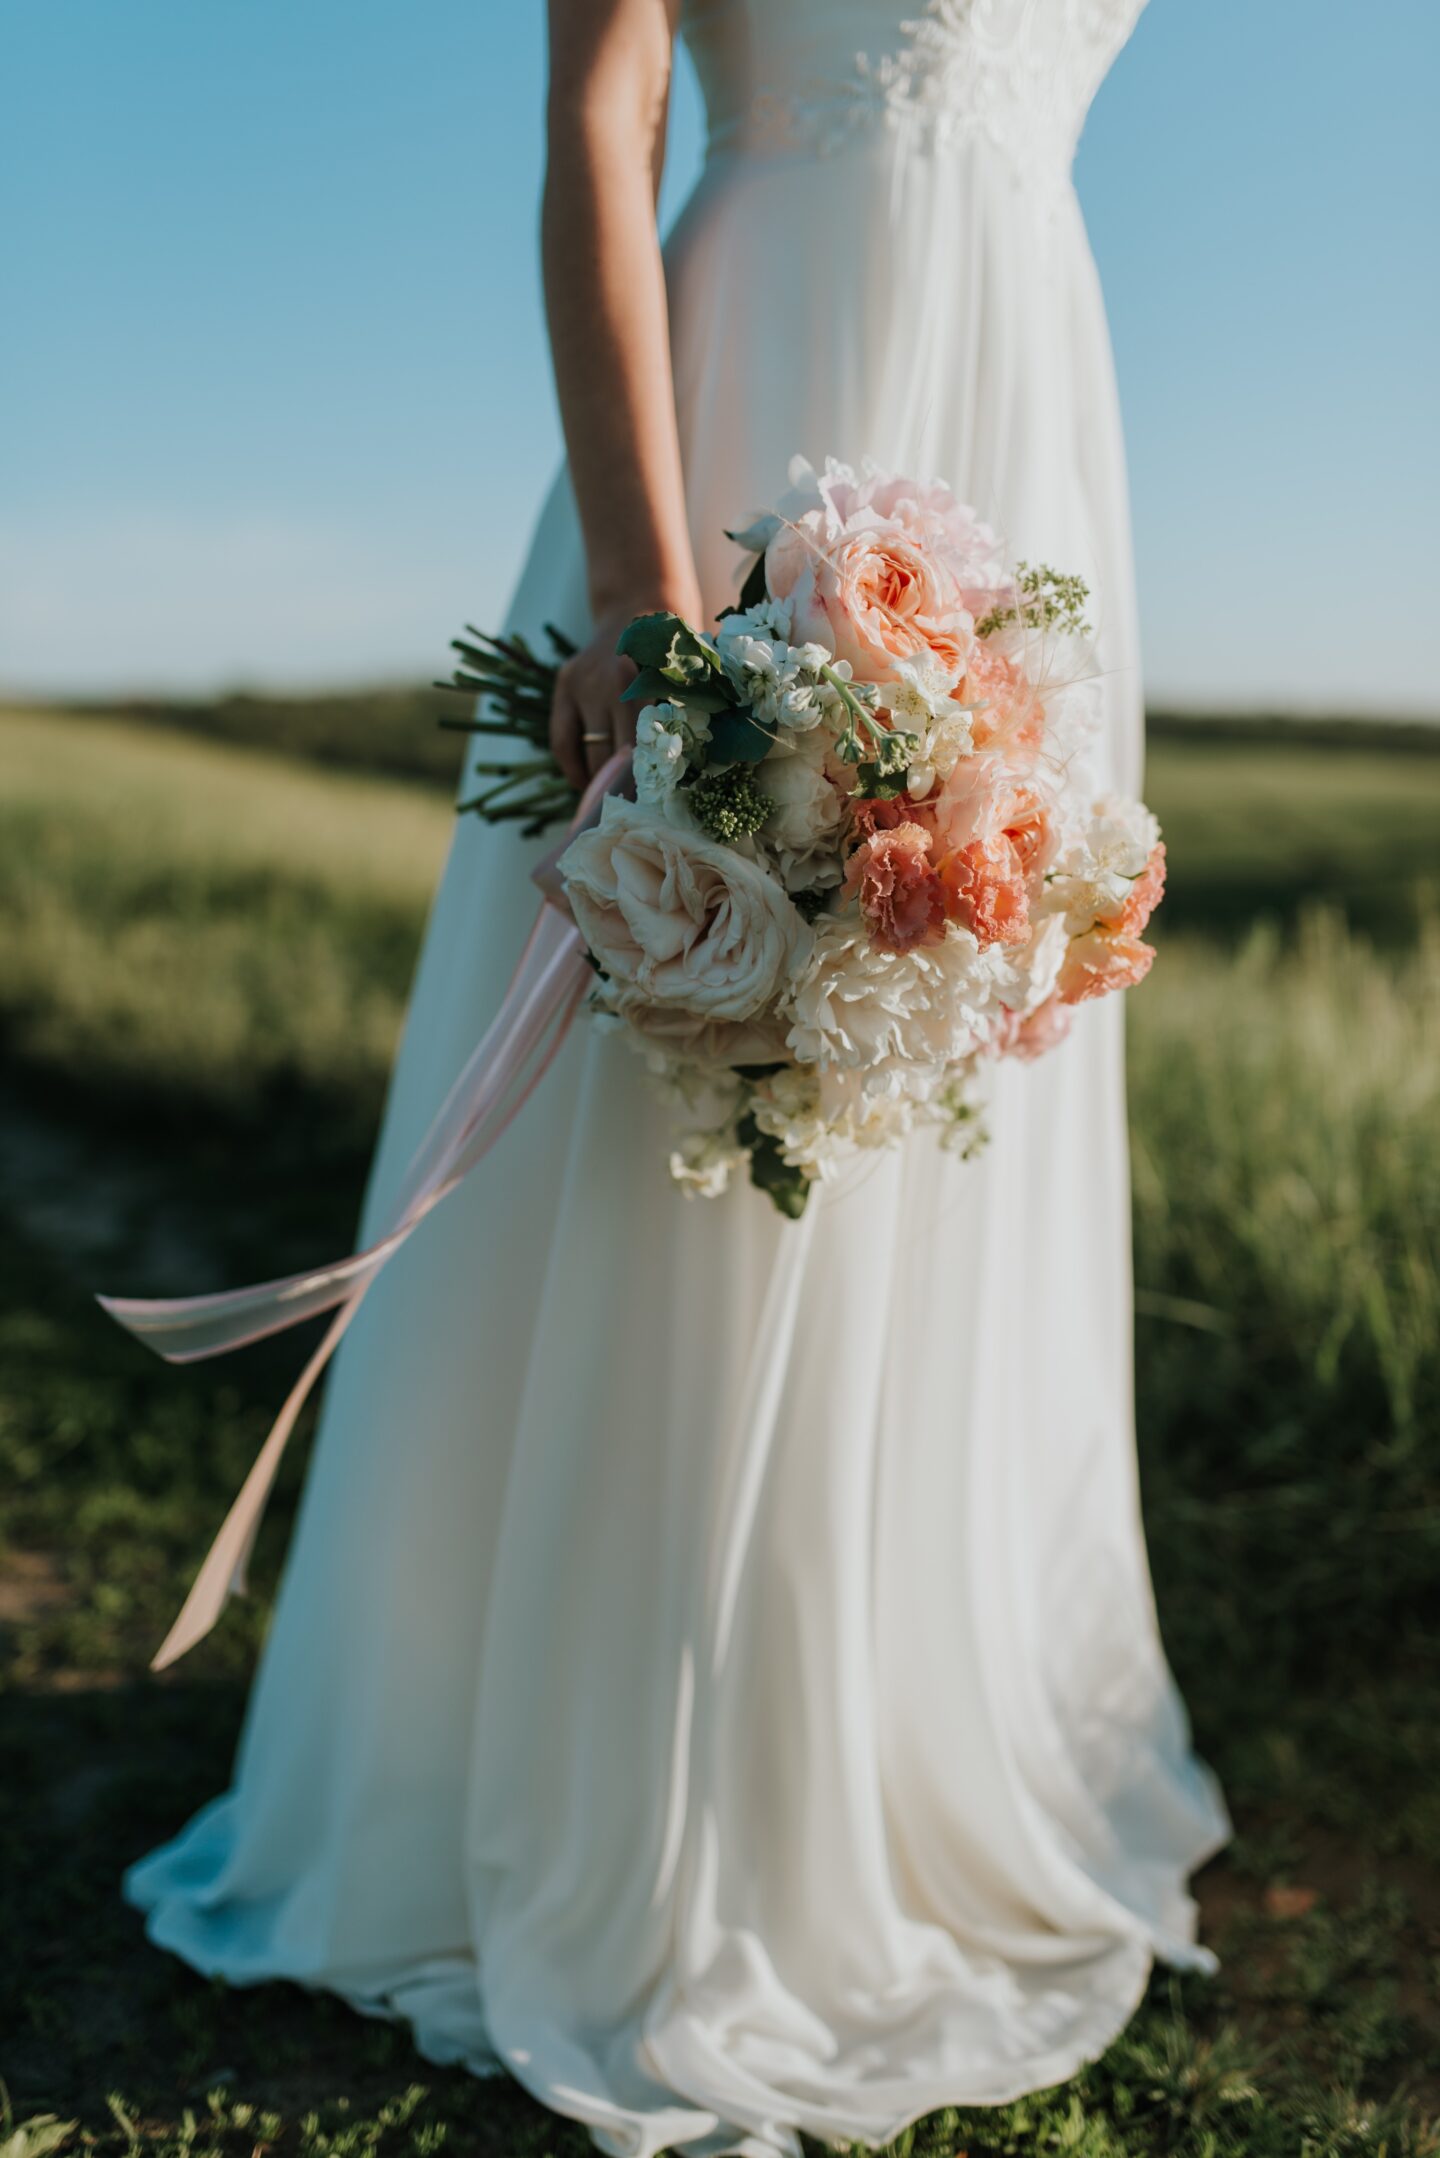 5 Tips For Renting Your Wedding Dress